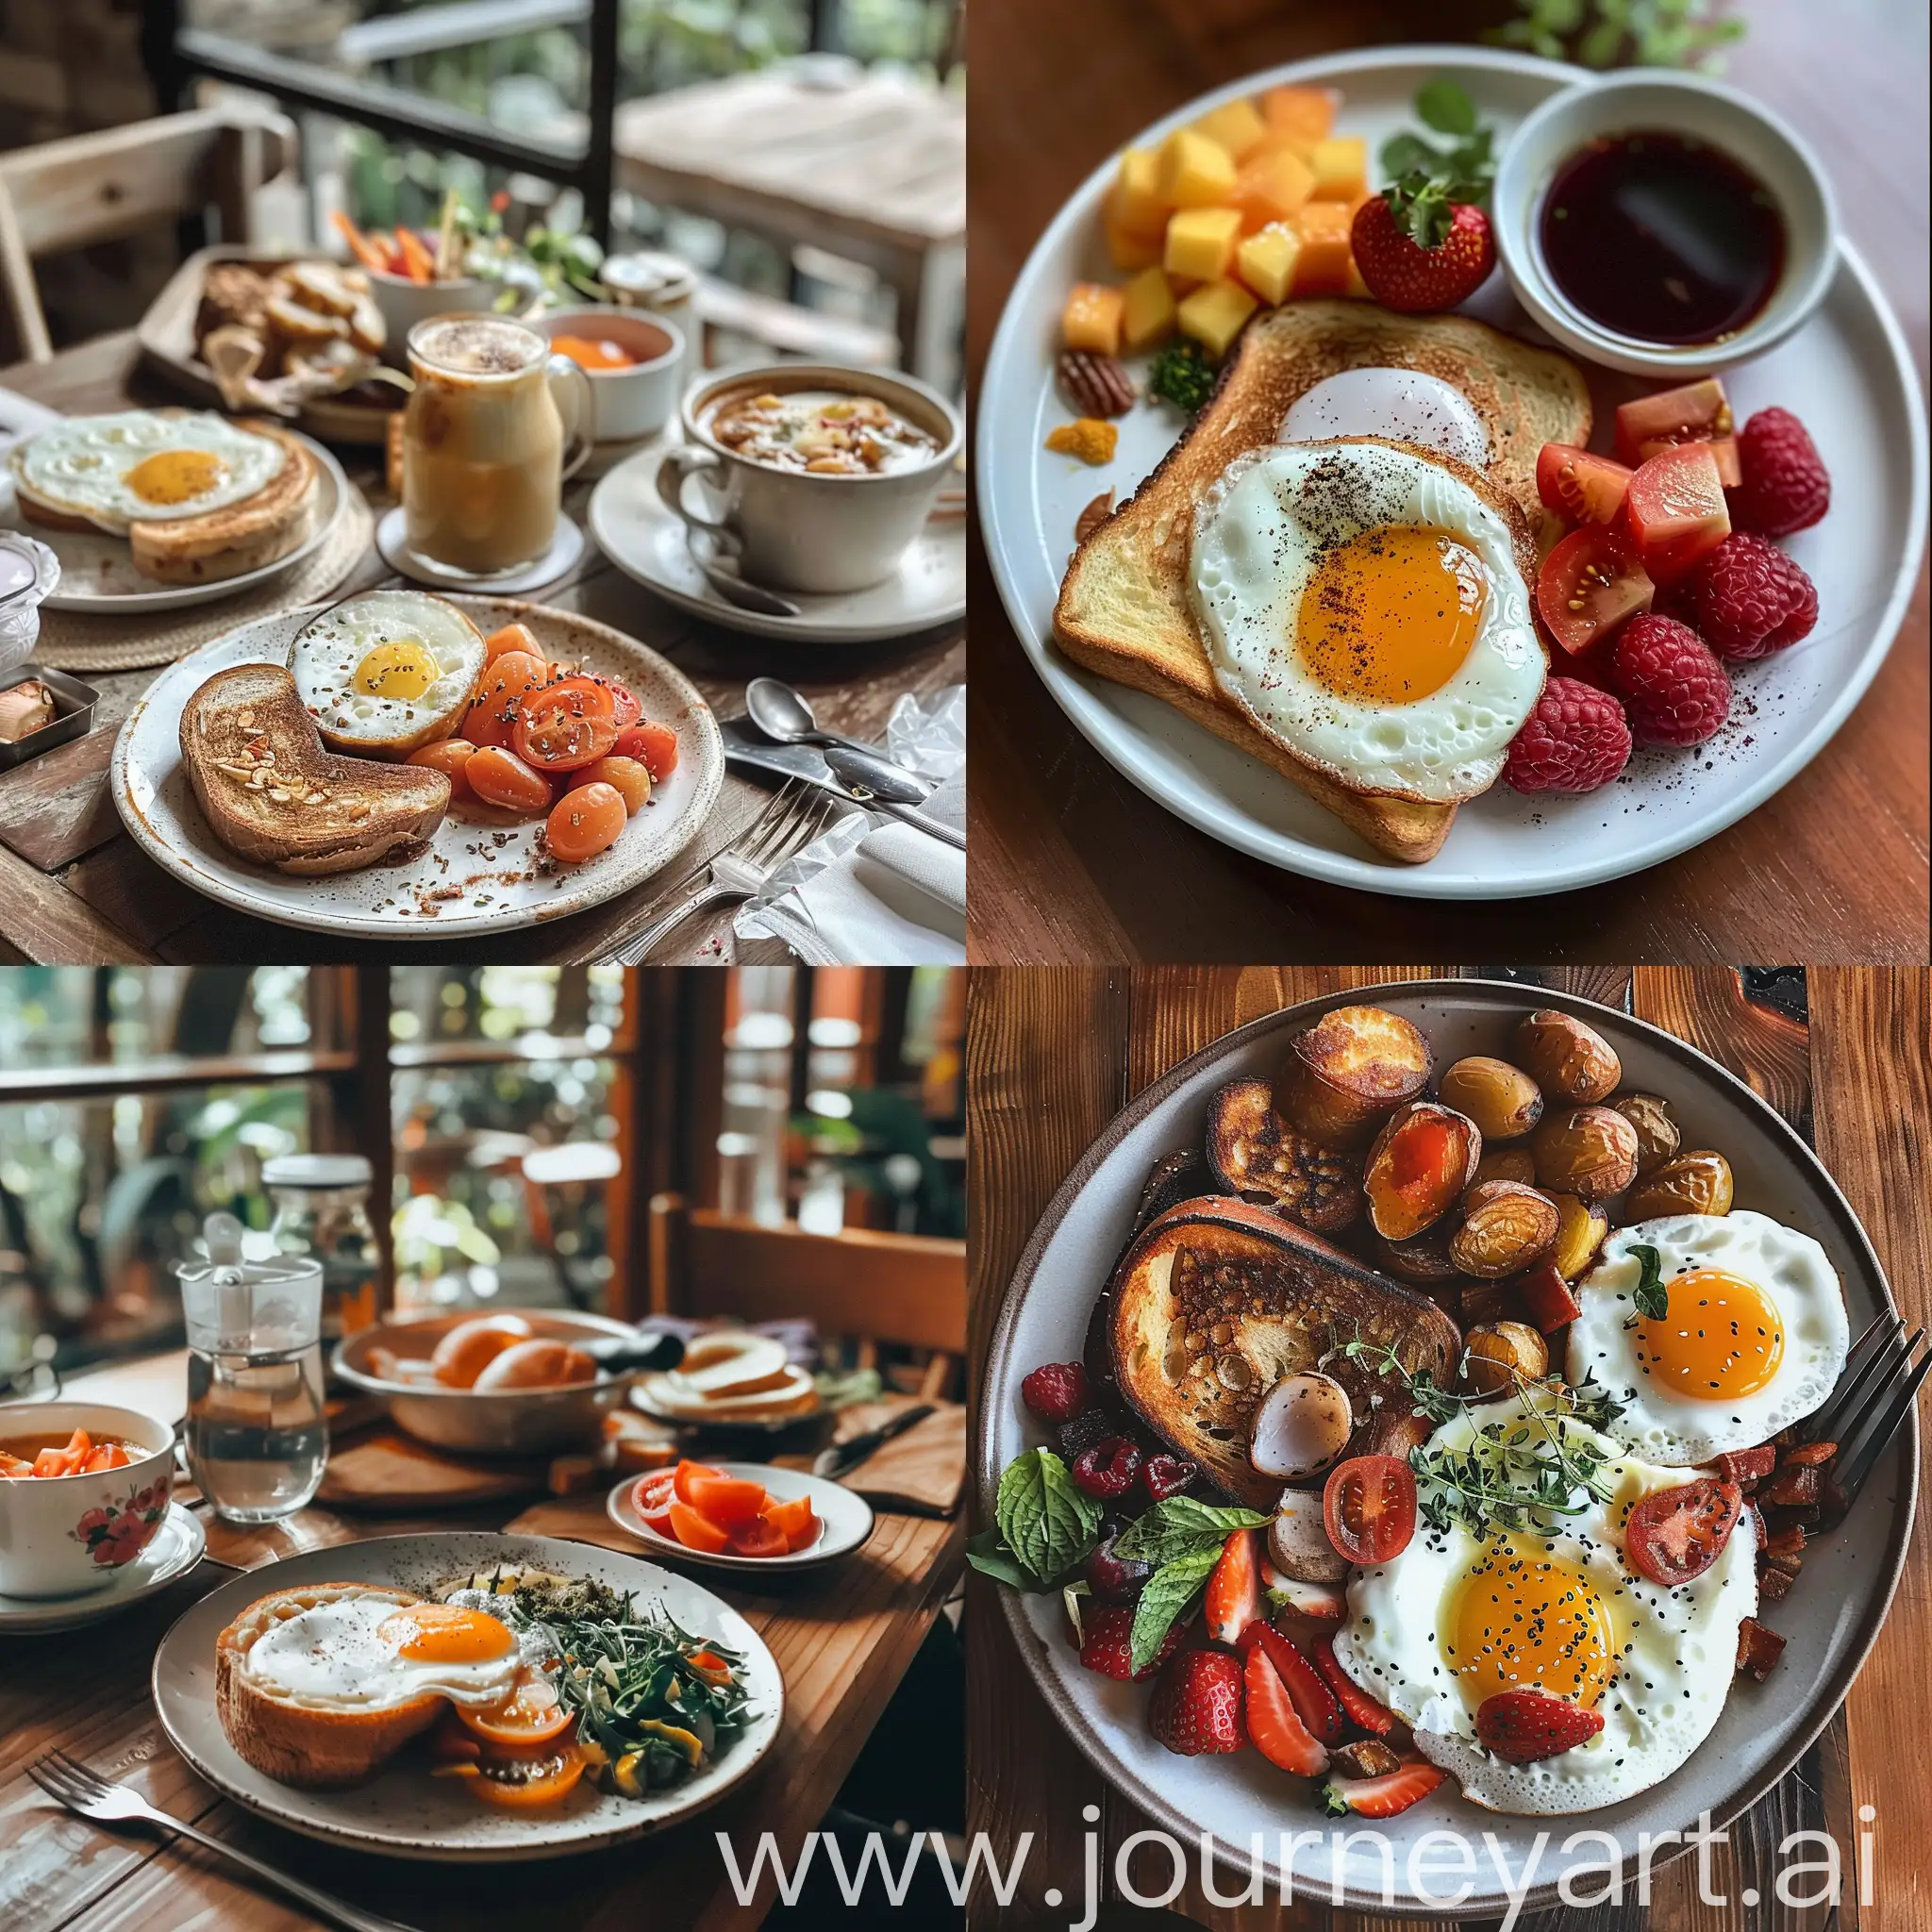 Vibrant-Breakfast-Spread-with-Assorted-Delicacies